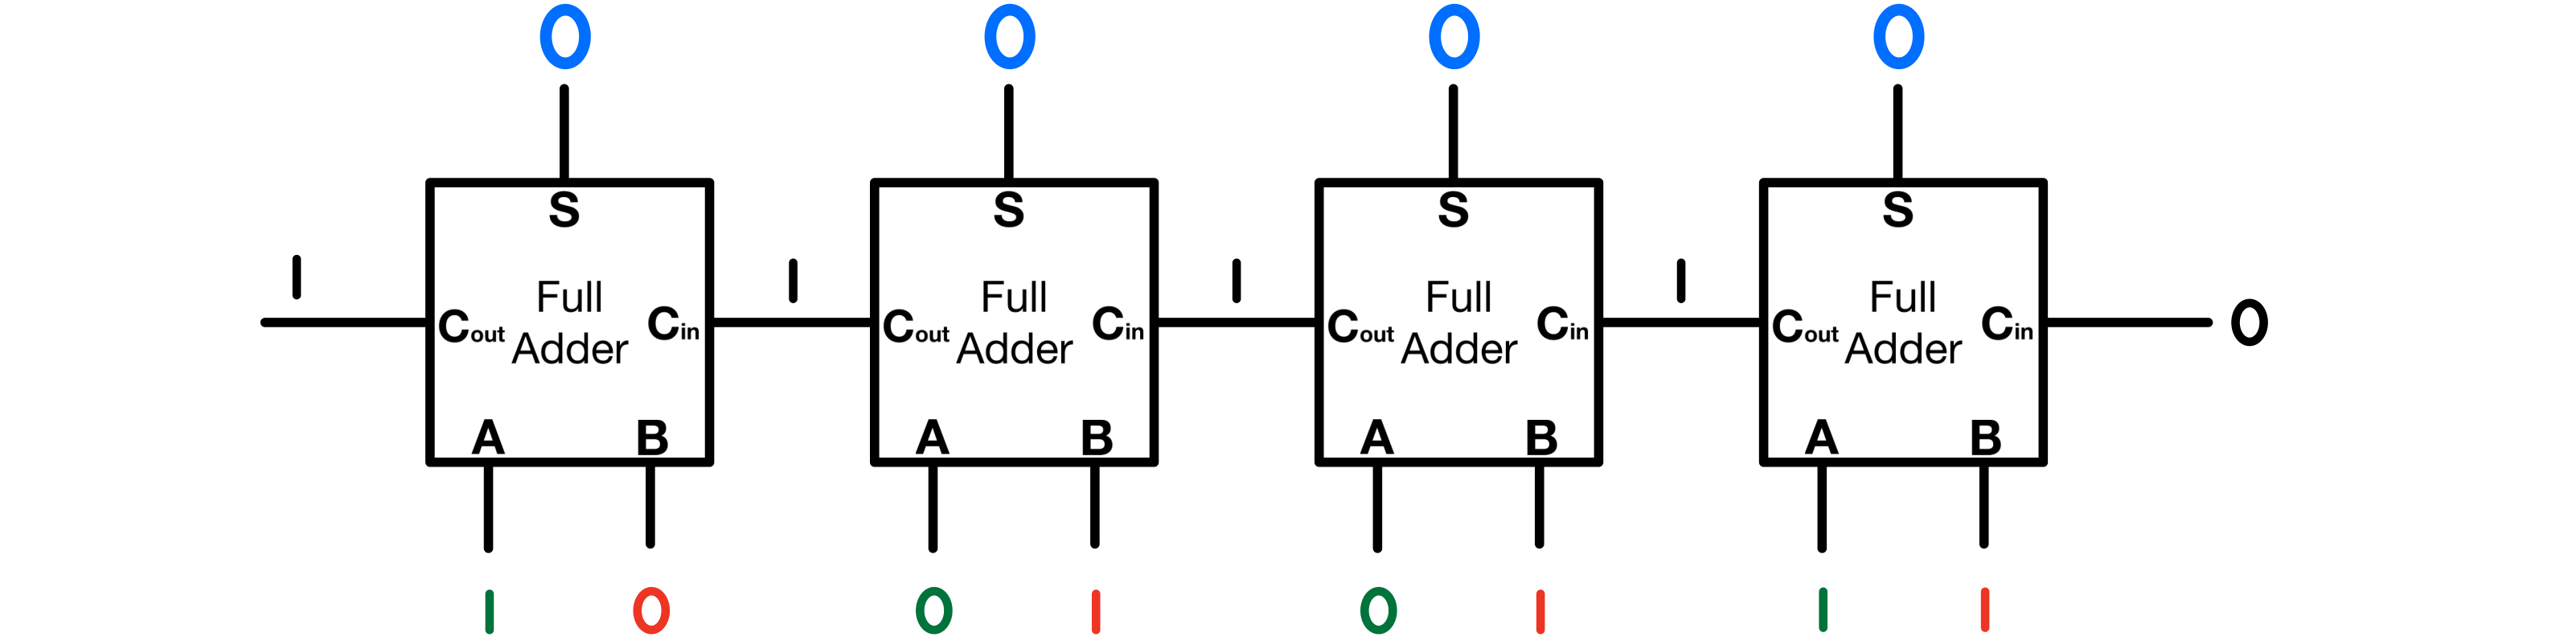 Figure 5: Addition of 1001 and 0111 Using a Full Adder